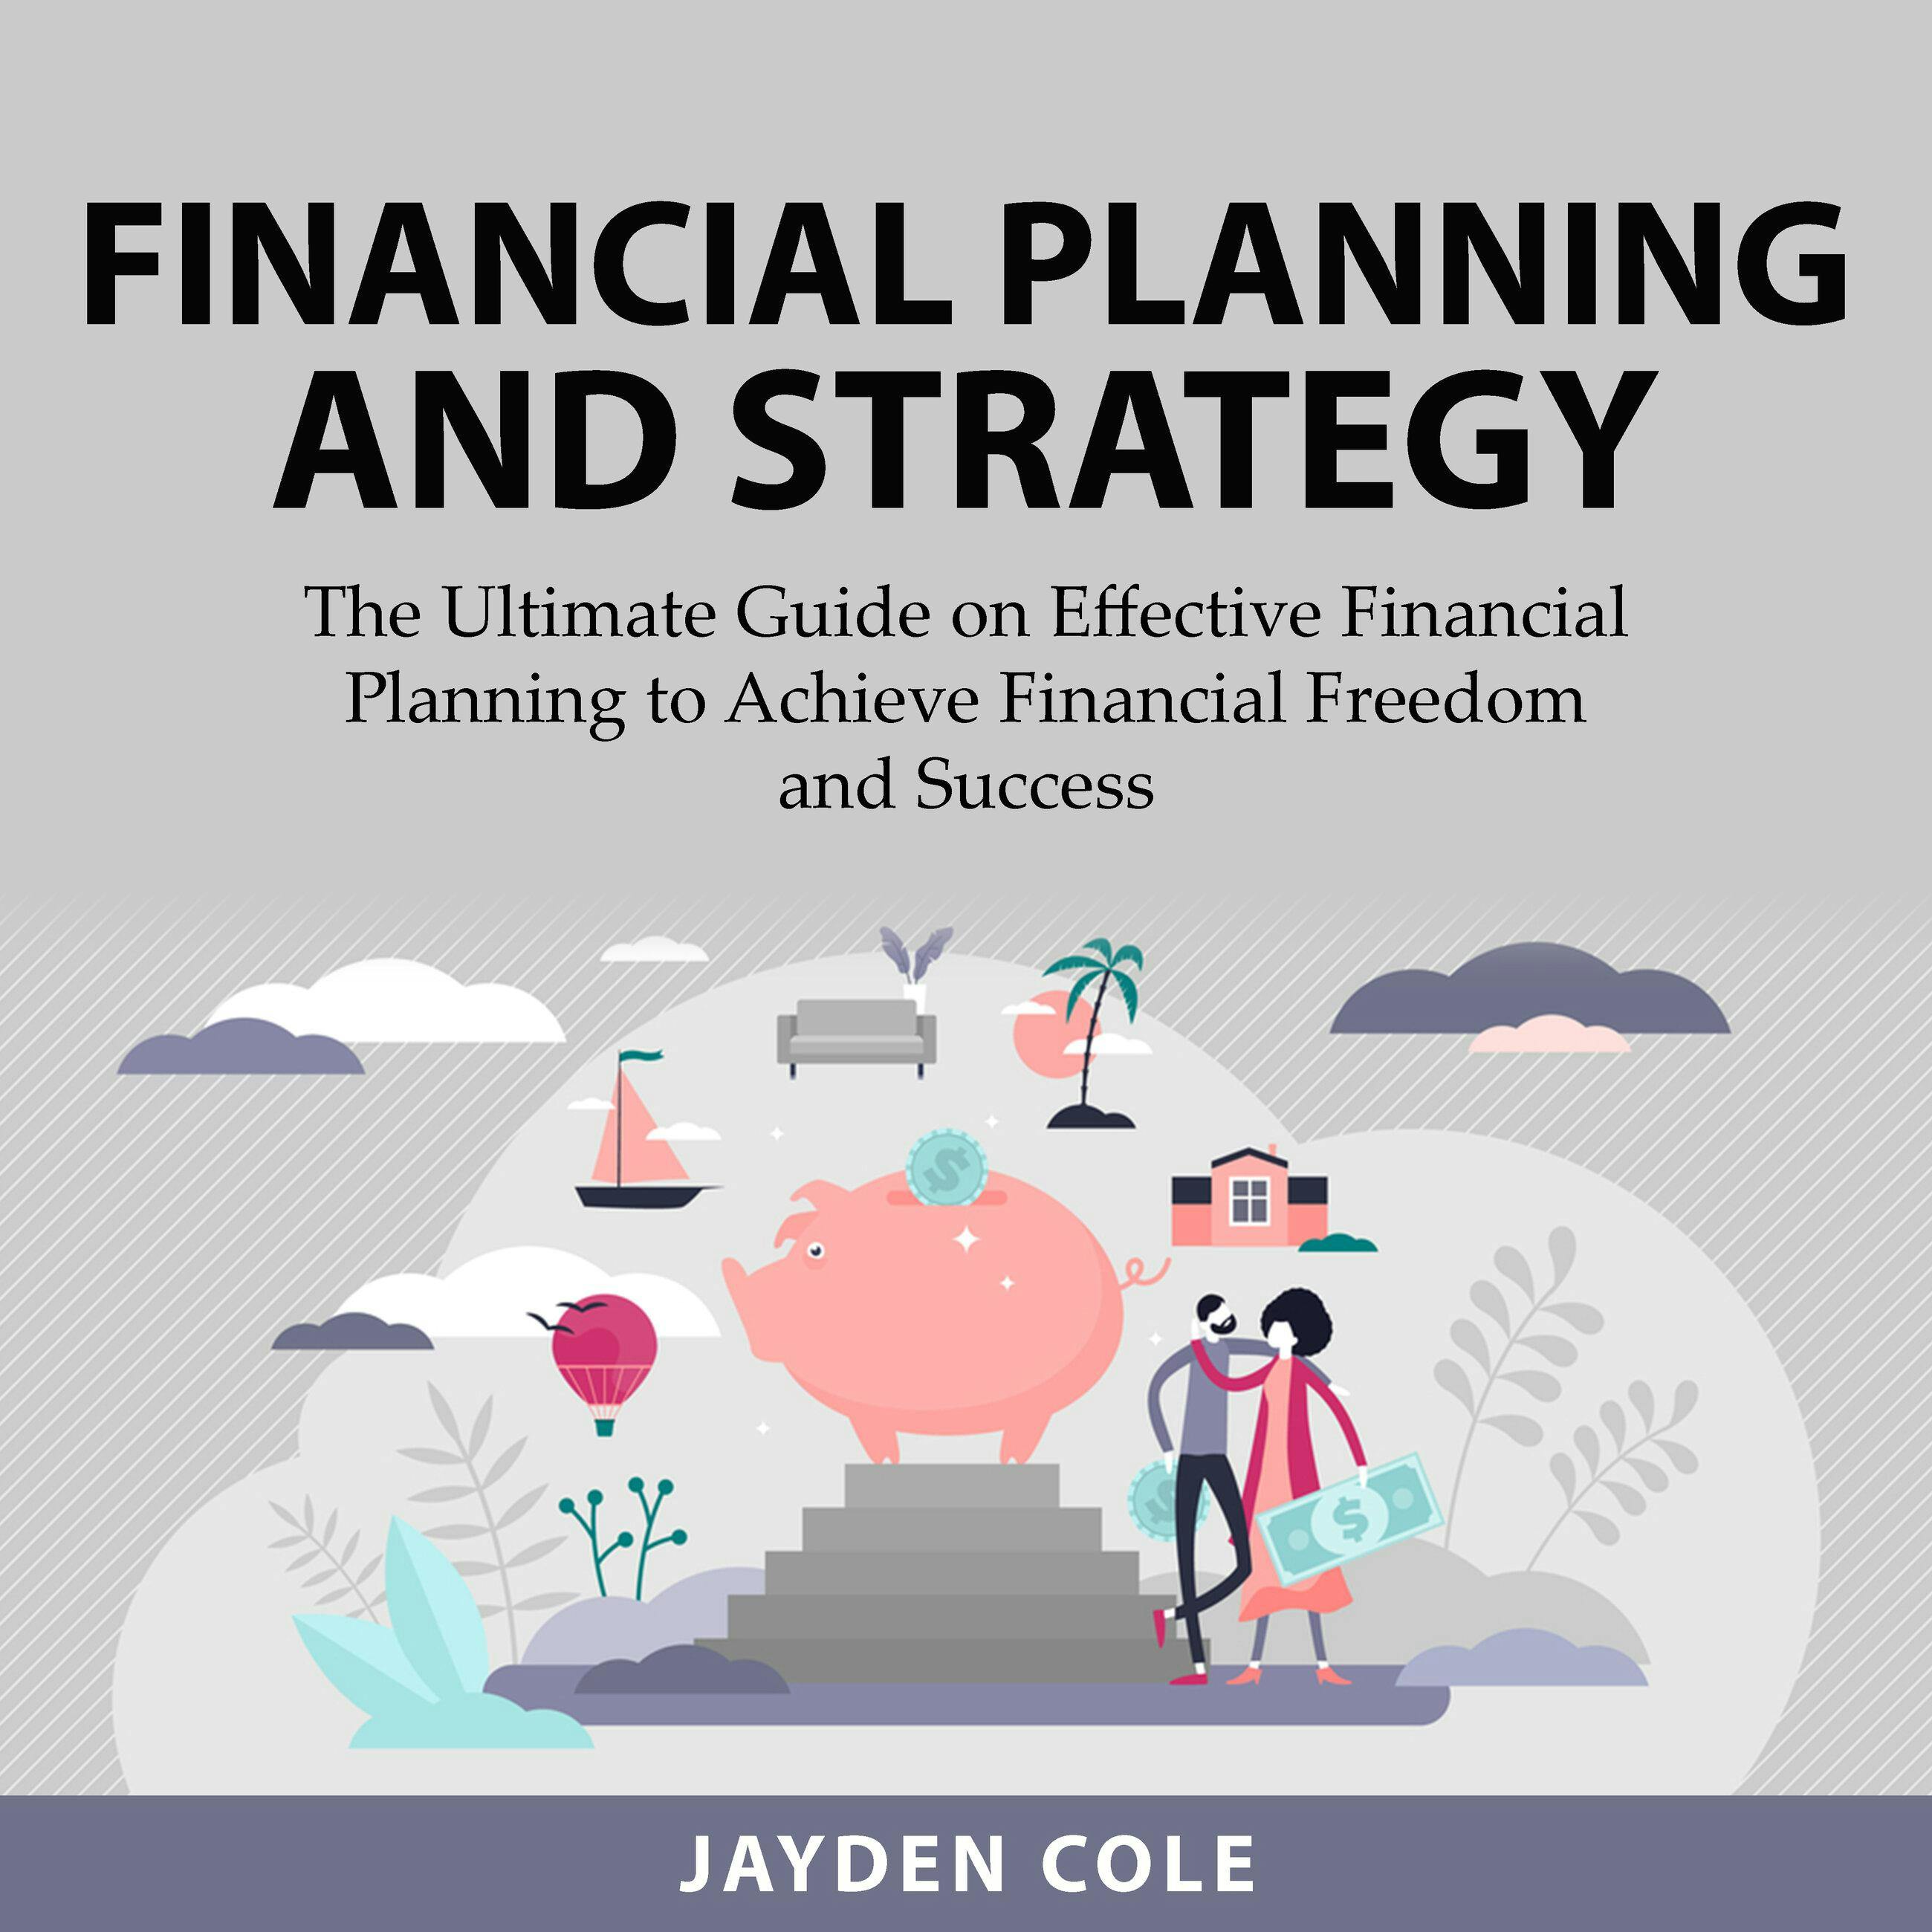 Financial Planning and Strategy: The Ultimate Guide on Effective Financial Planning to Achieve Financial Freedom and Success - Jayden Cole